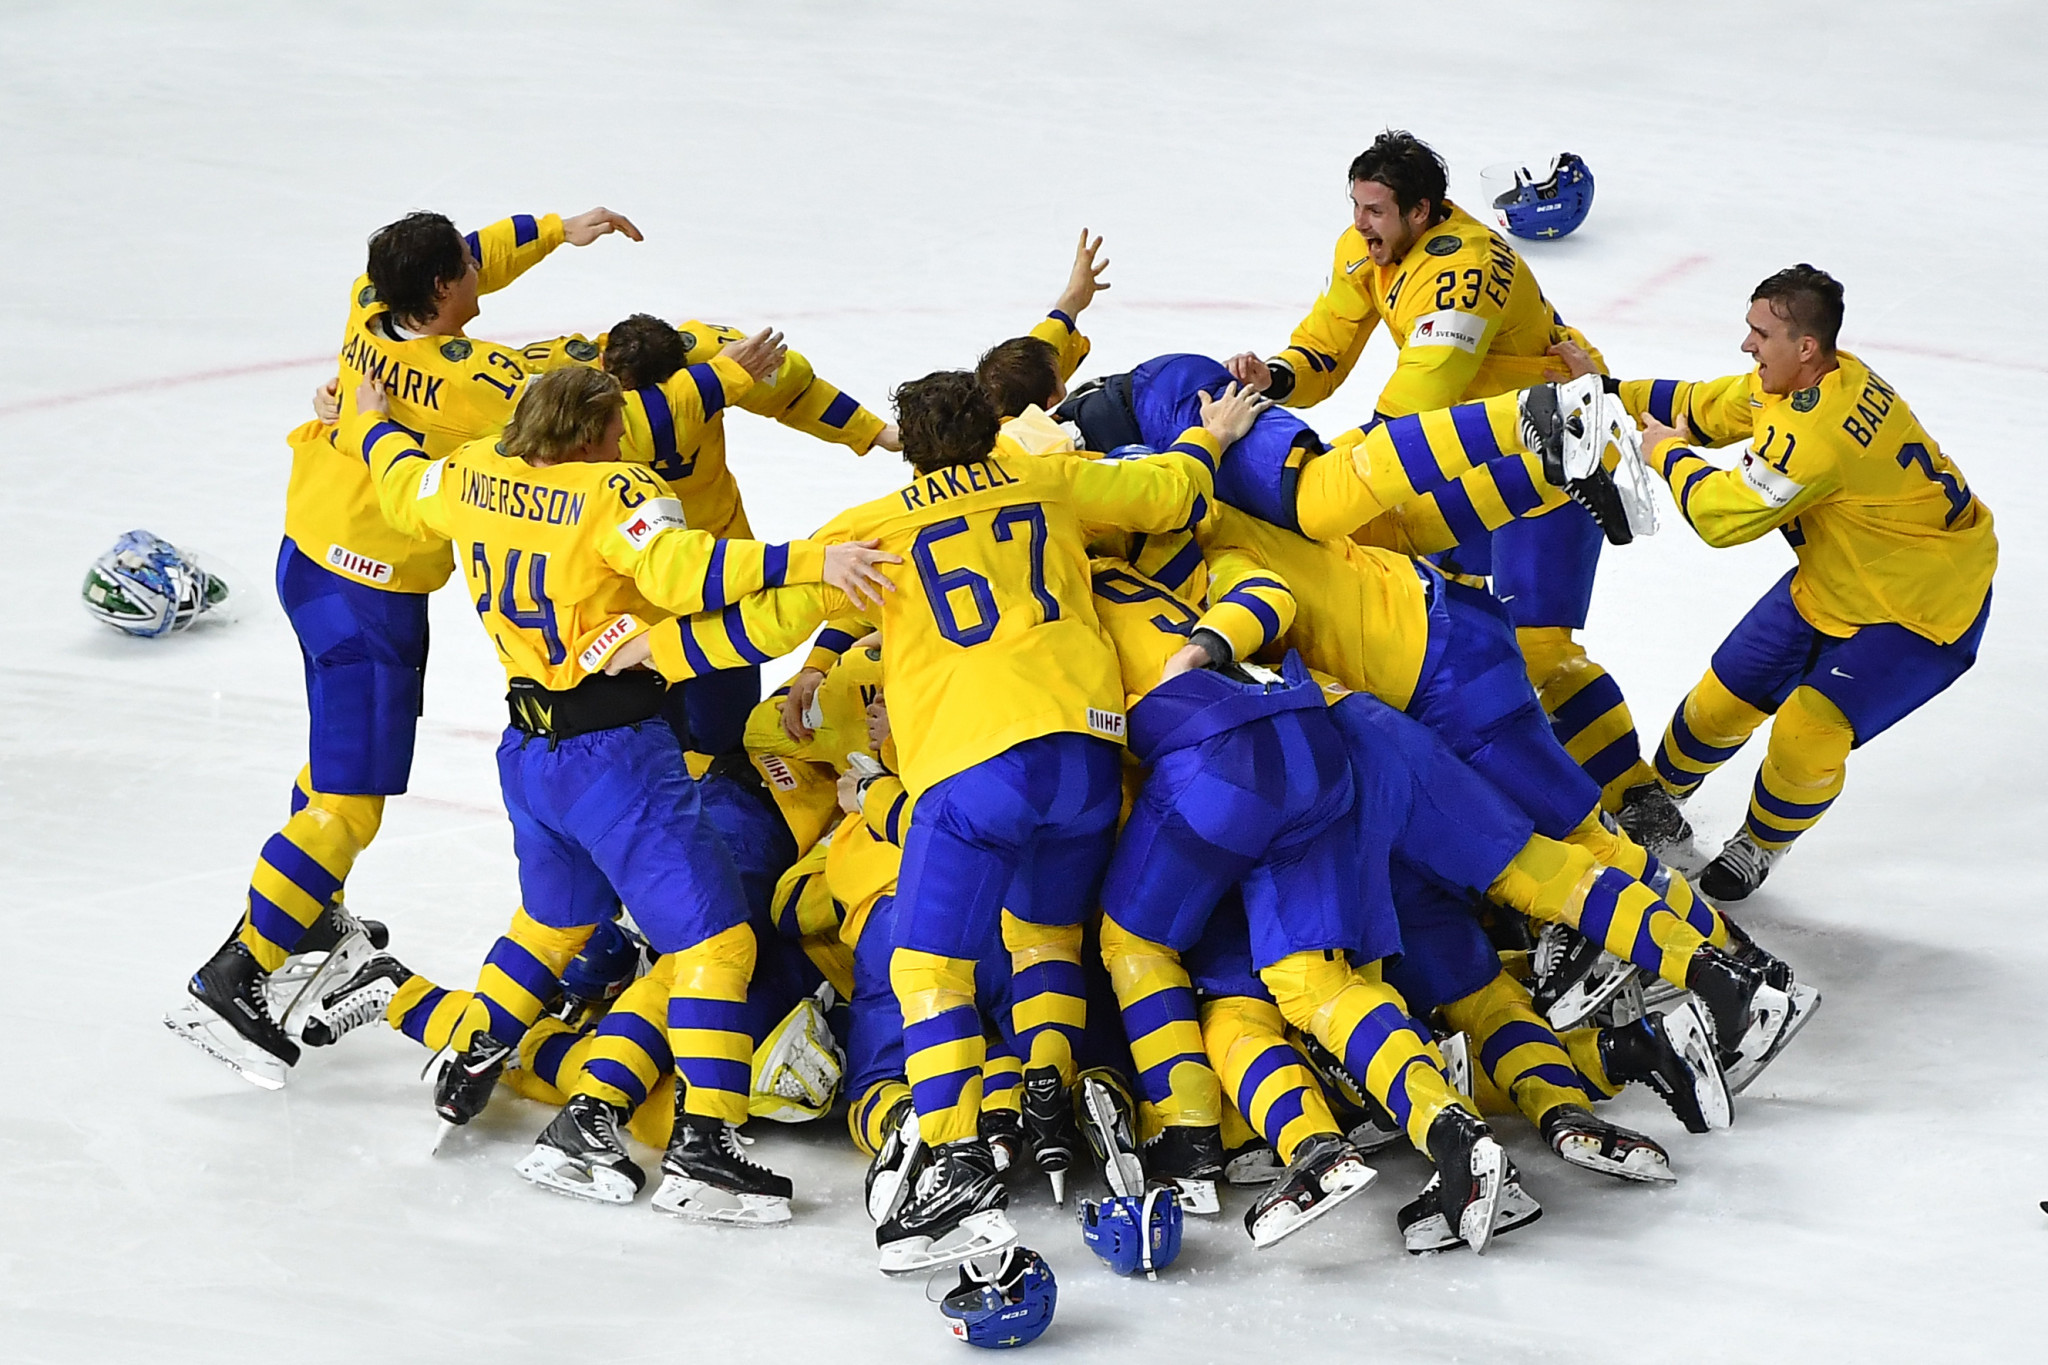 Organisers reveal details of ticket prices for 2019 IIHF World Championship